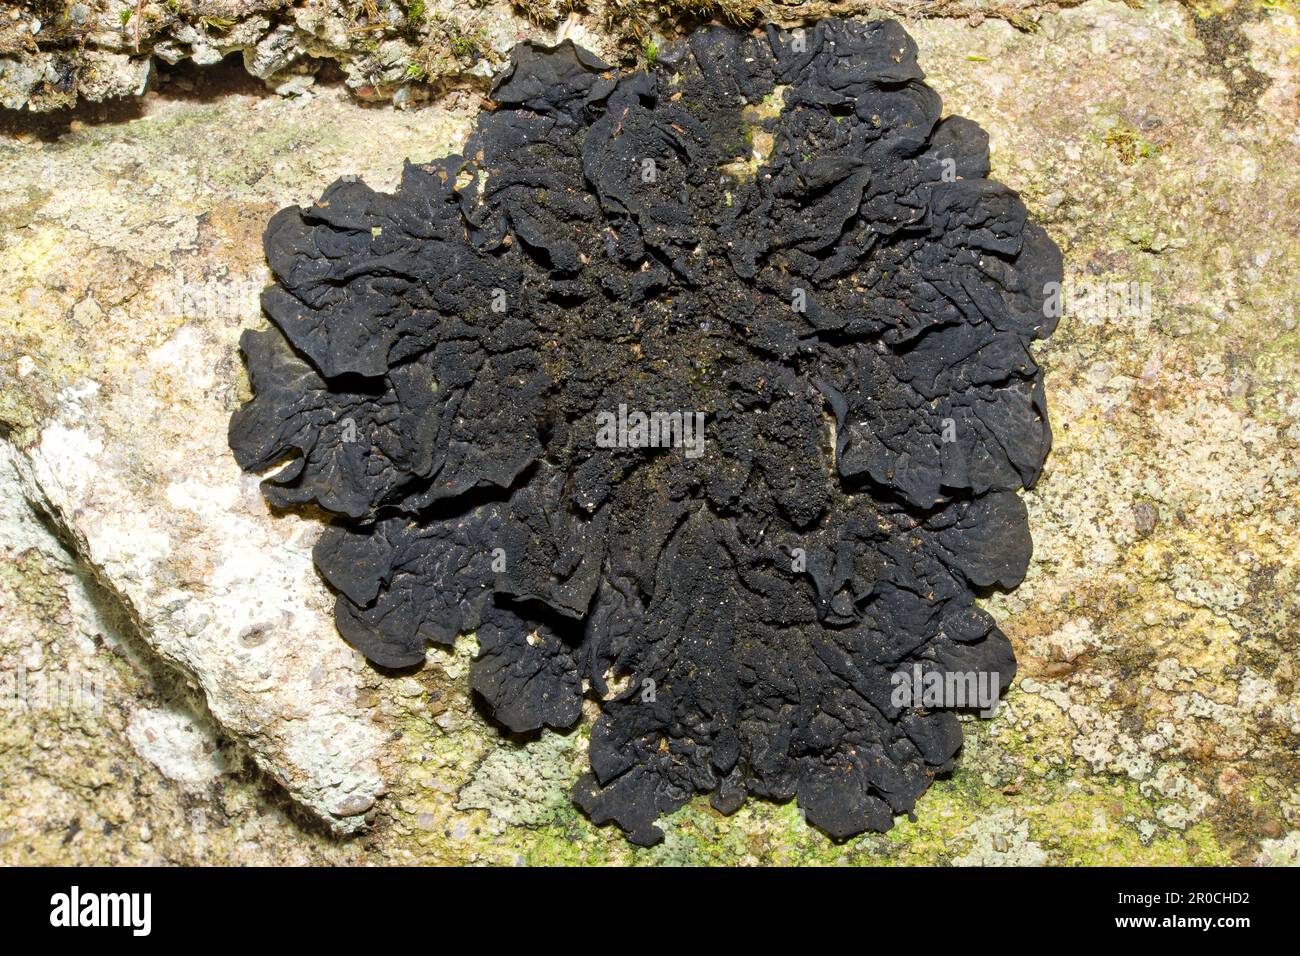 Collema flaccidum is a foliose lichen found on acidic and calcareous rocks by streams and waterfalls. It has a global distribution. Stock Photo